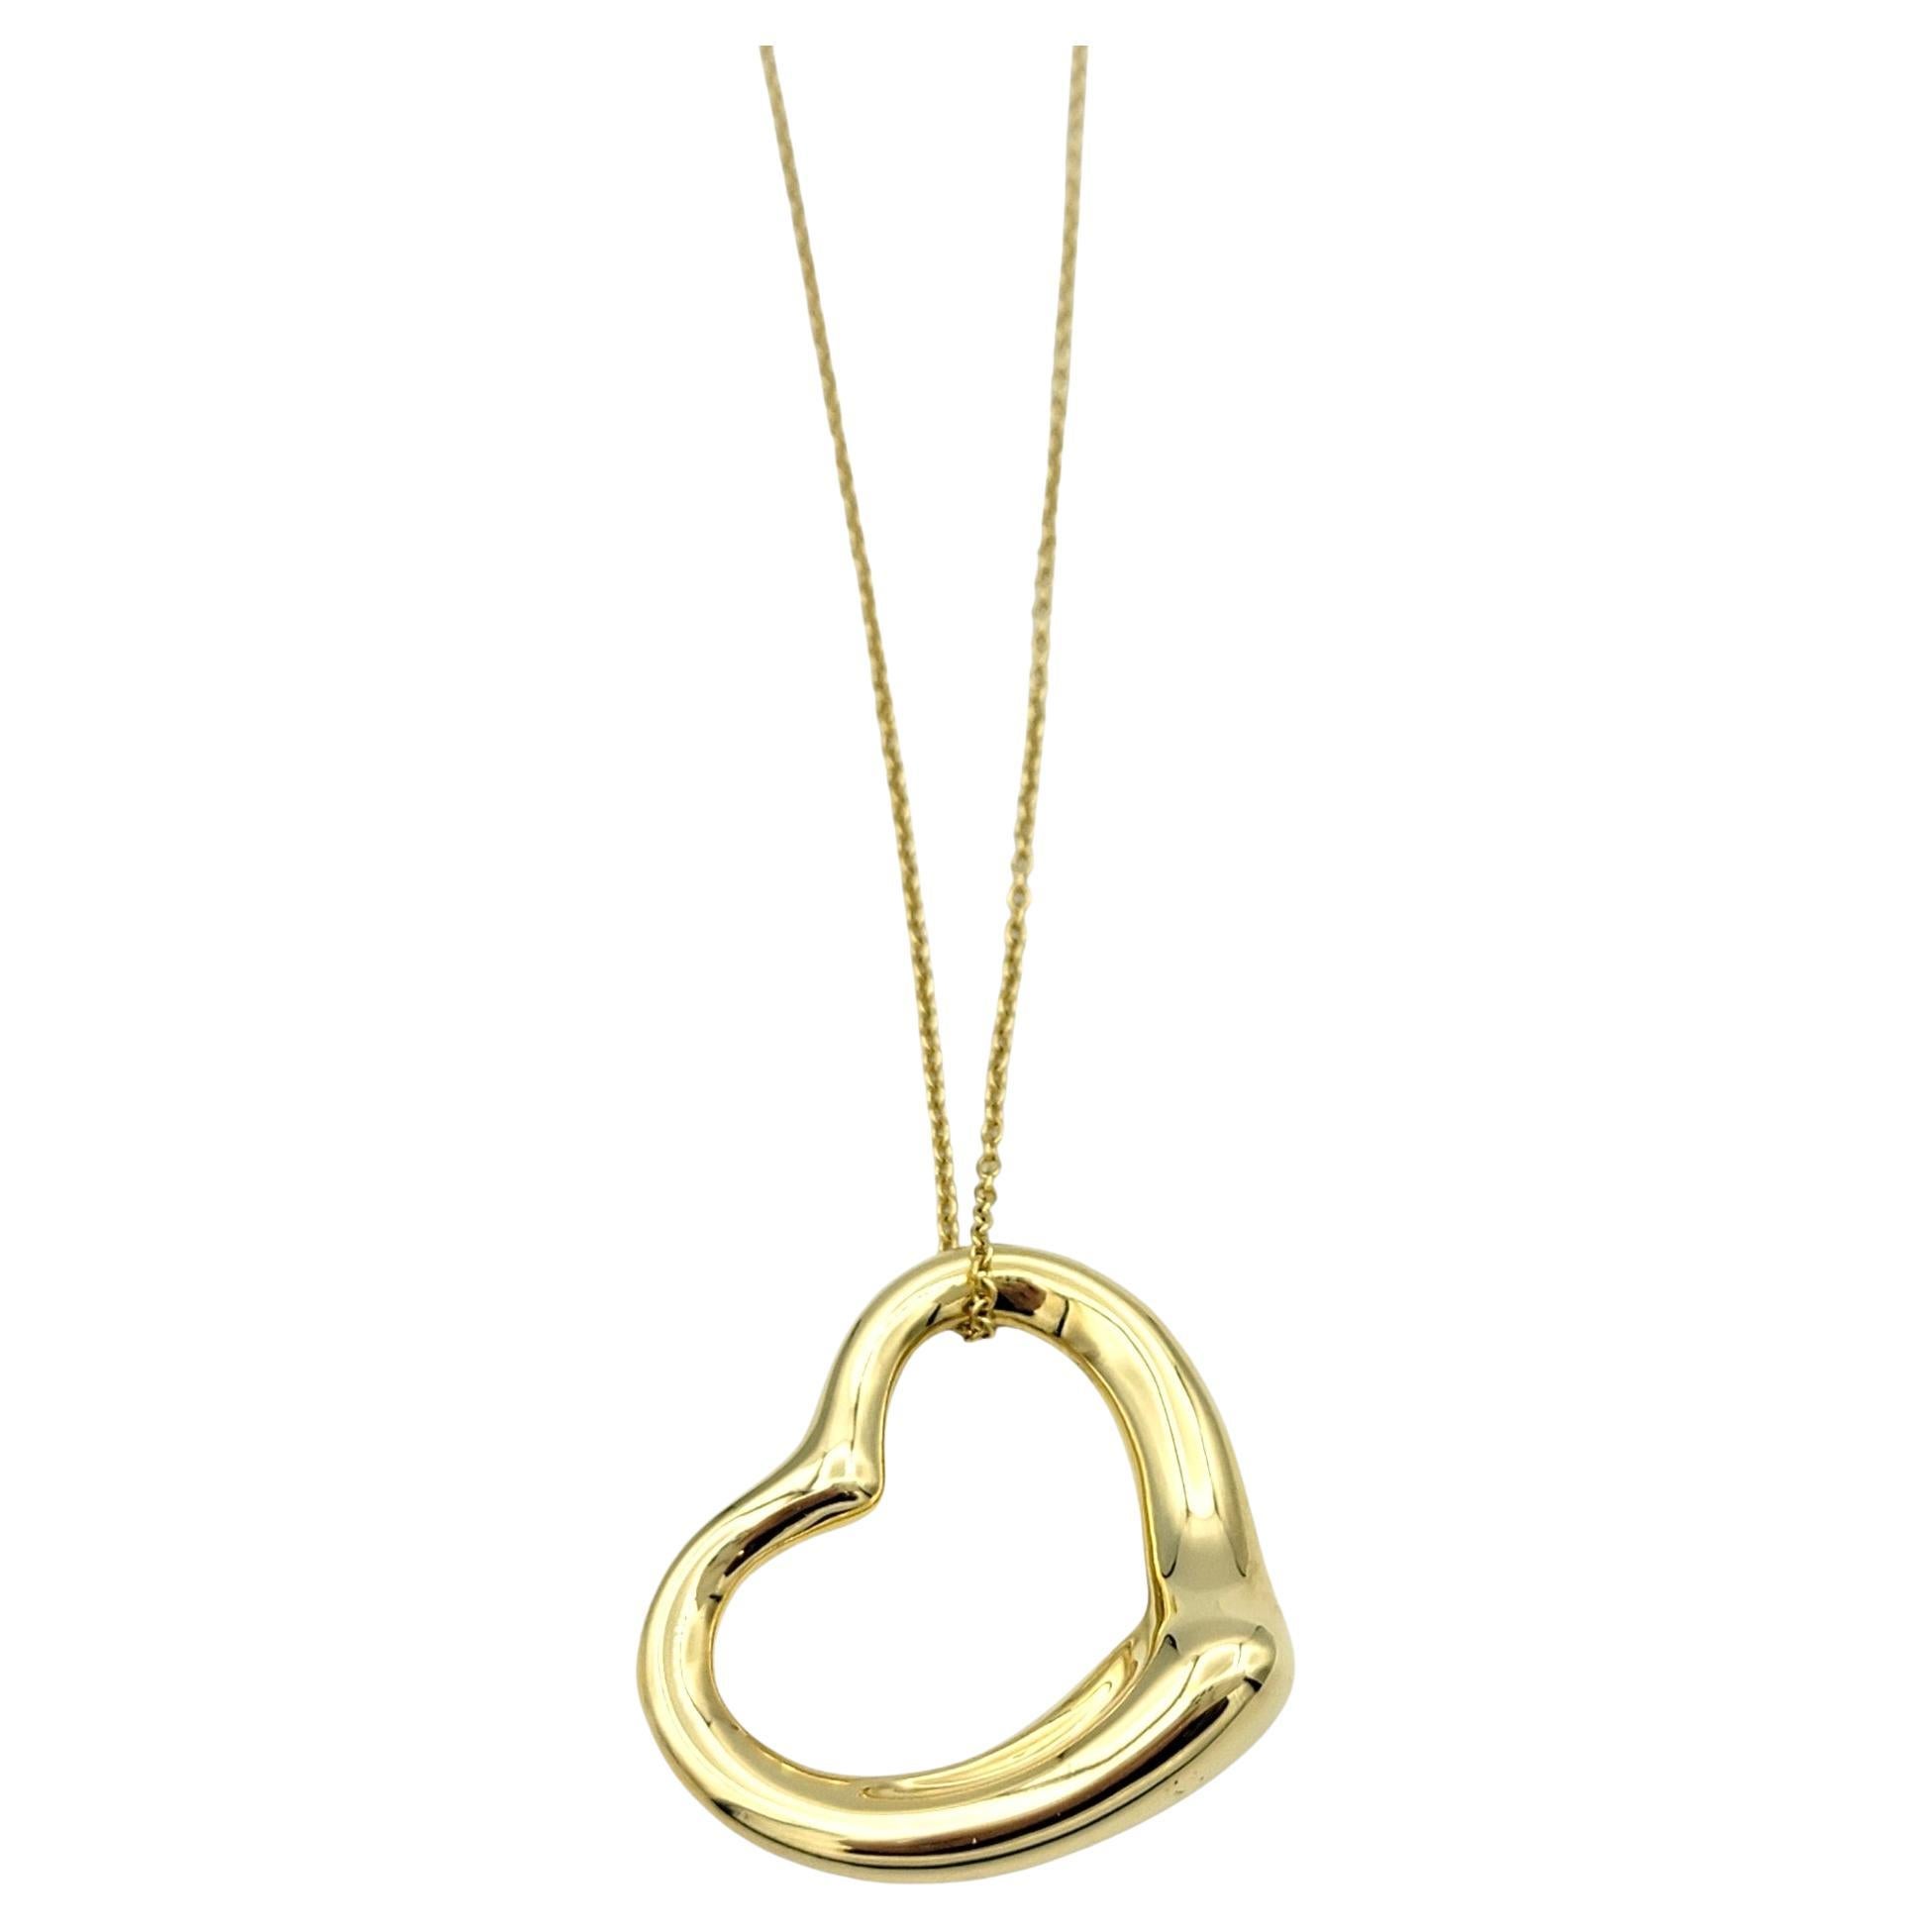 This Tiffany & Co. Elsa Peretti Open Heart Necklace, crafted in luxurious 18 karat yellow gold, is a timeless and iconic piece of jewelry. Designed by the renowned artist Elsa Peretti, this necklace features a delicate open heart pendant that exudes